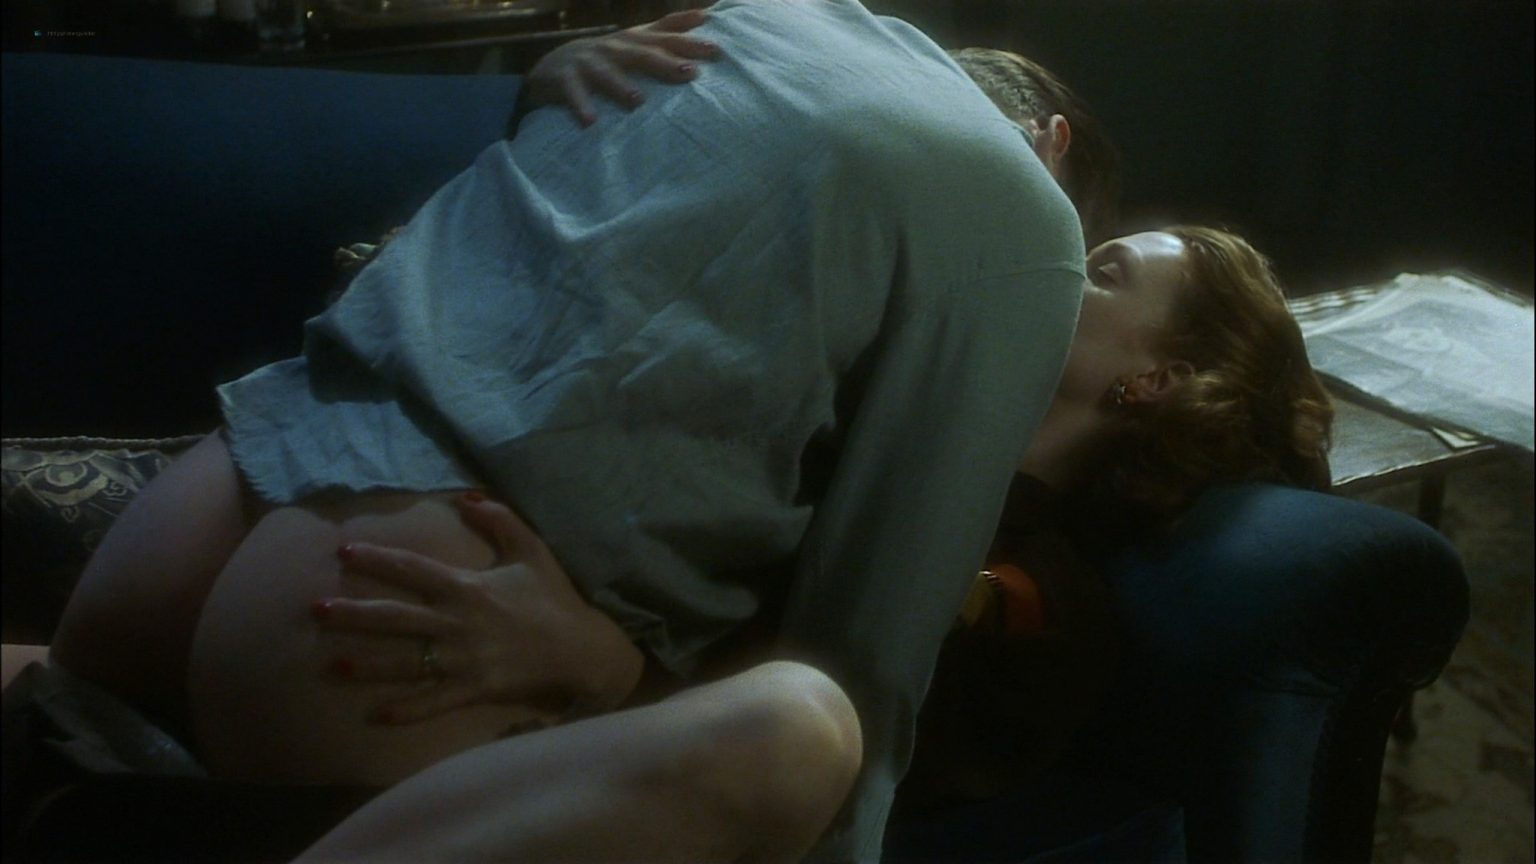 https://www.zorg.video/wp-content/uploads/2017/06/Julianne-Moore-nude-topless-and-sex-The-End-of-the-Affair-1999-HD-1080p-WEB-001-1536x864.jpg